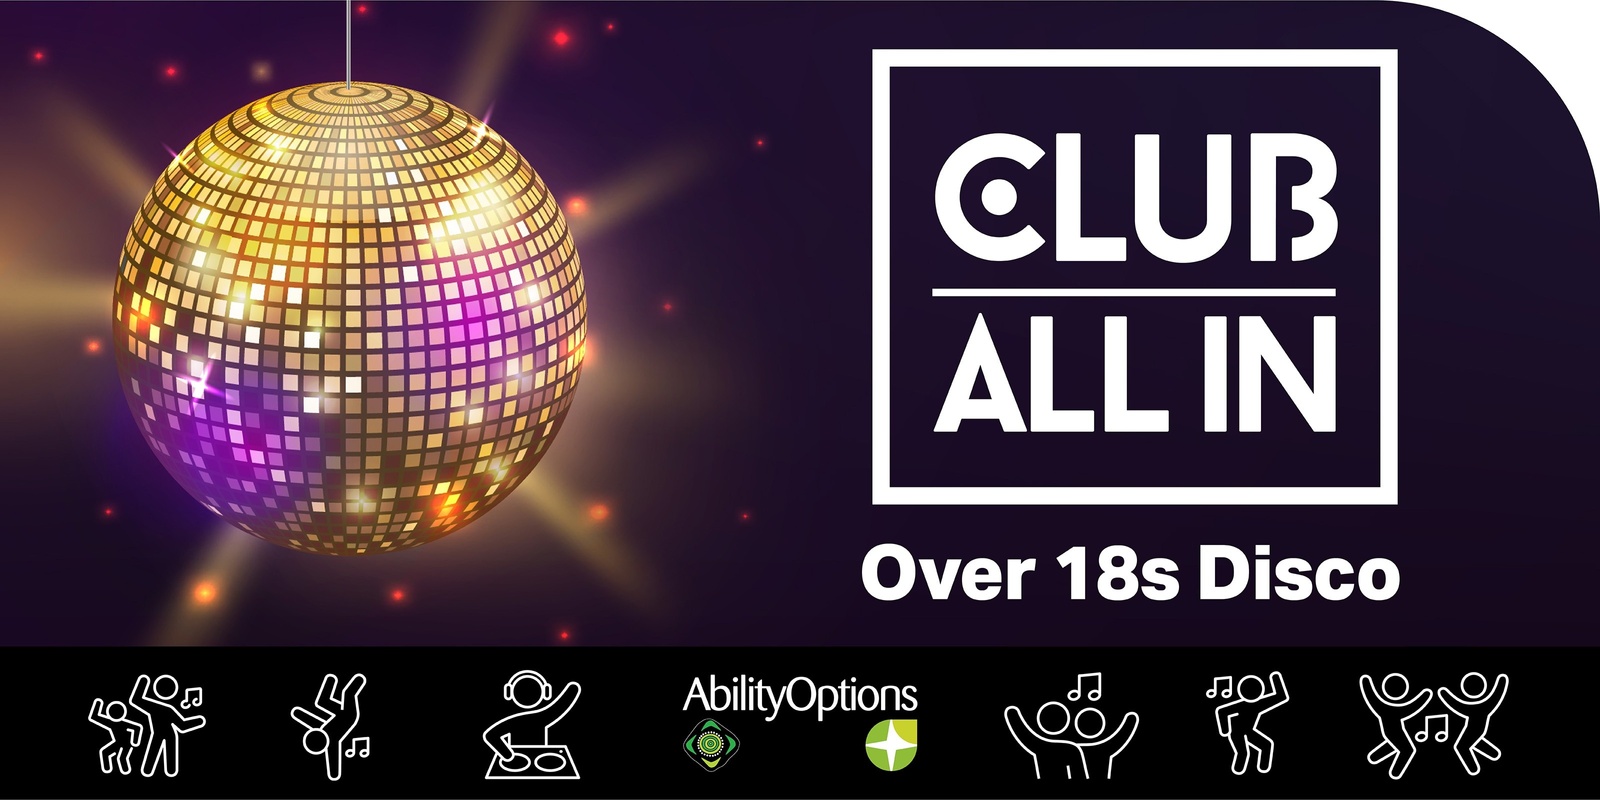 Banner image for Club All In - Seven Hills - 13 Dec 24